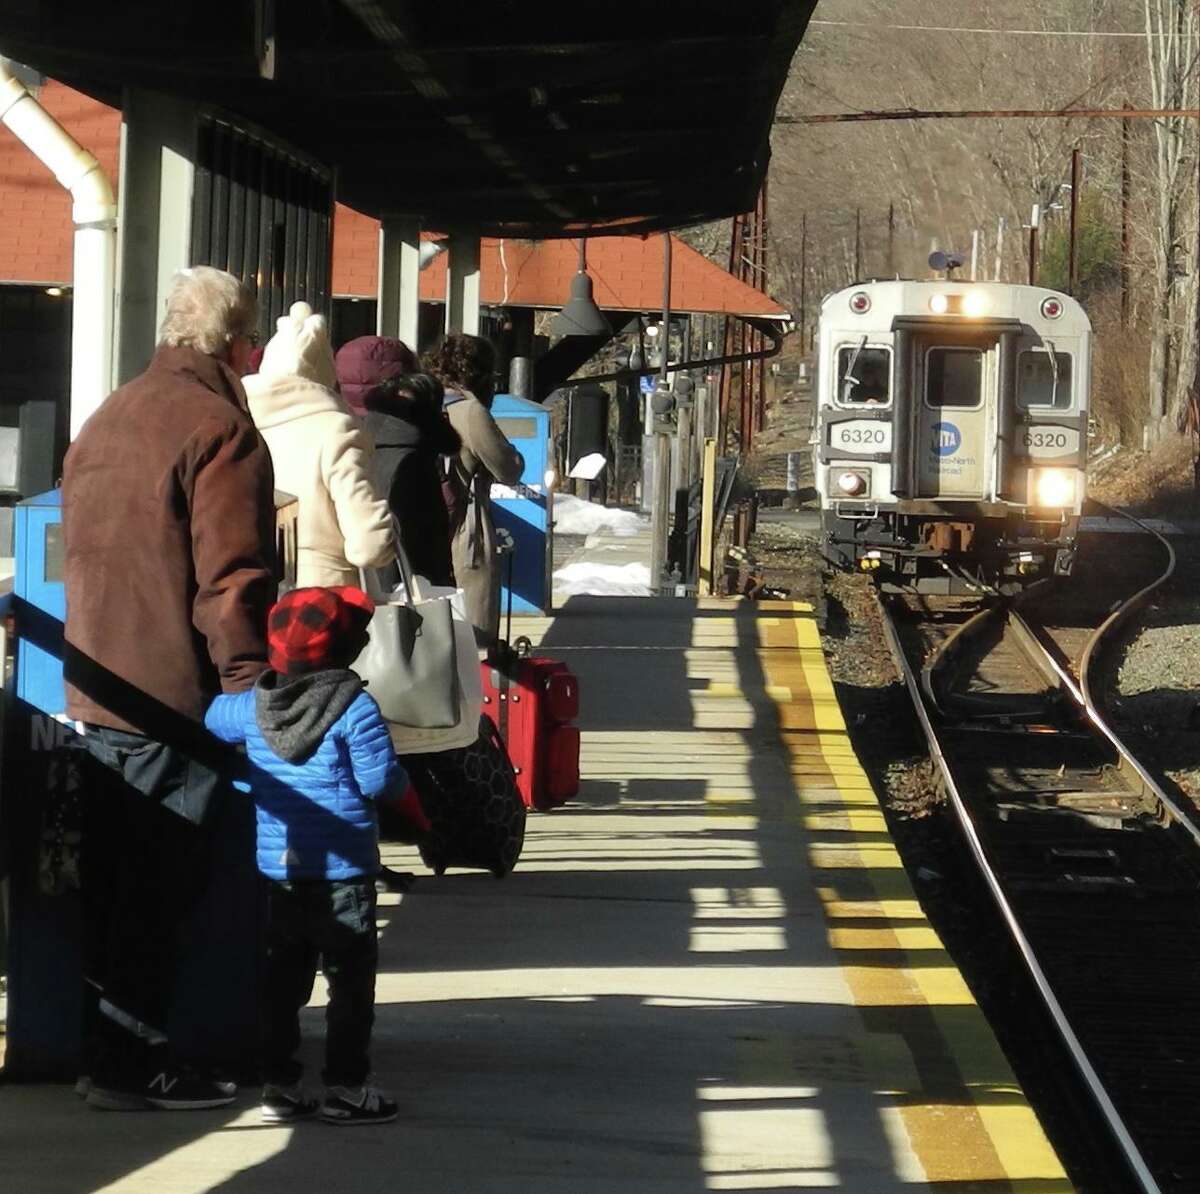 Branchville train station in Ridgefield is on the Danbury Branch line, which is among the operations that would benefit from the addition of new locomotives and cars under the proposed CT 2030 program.